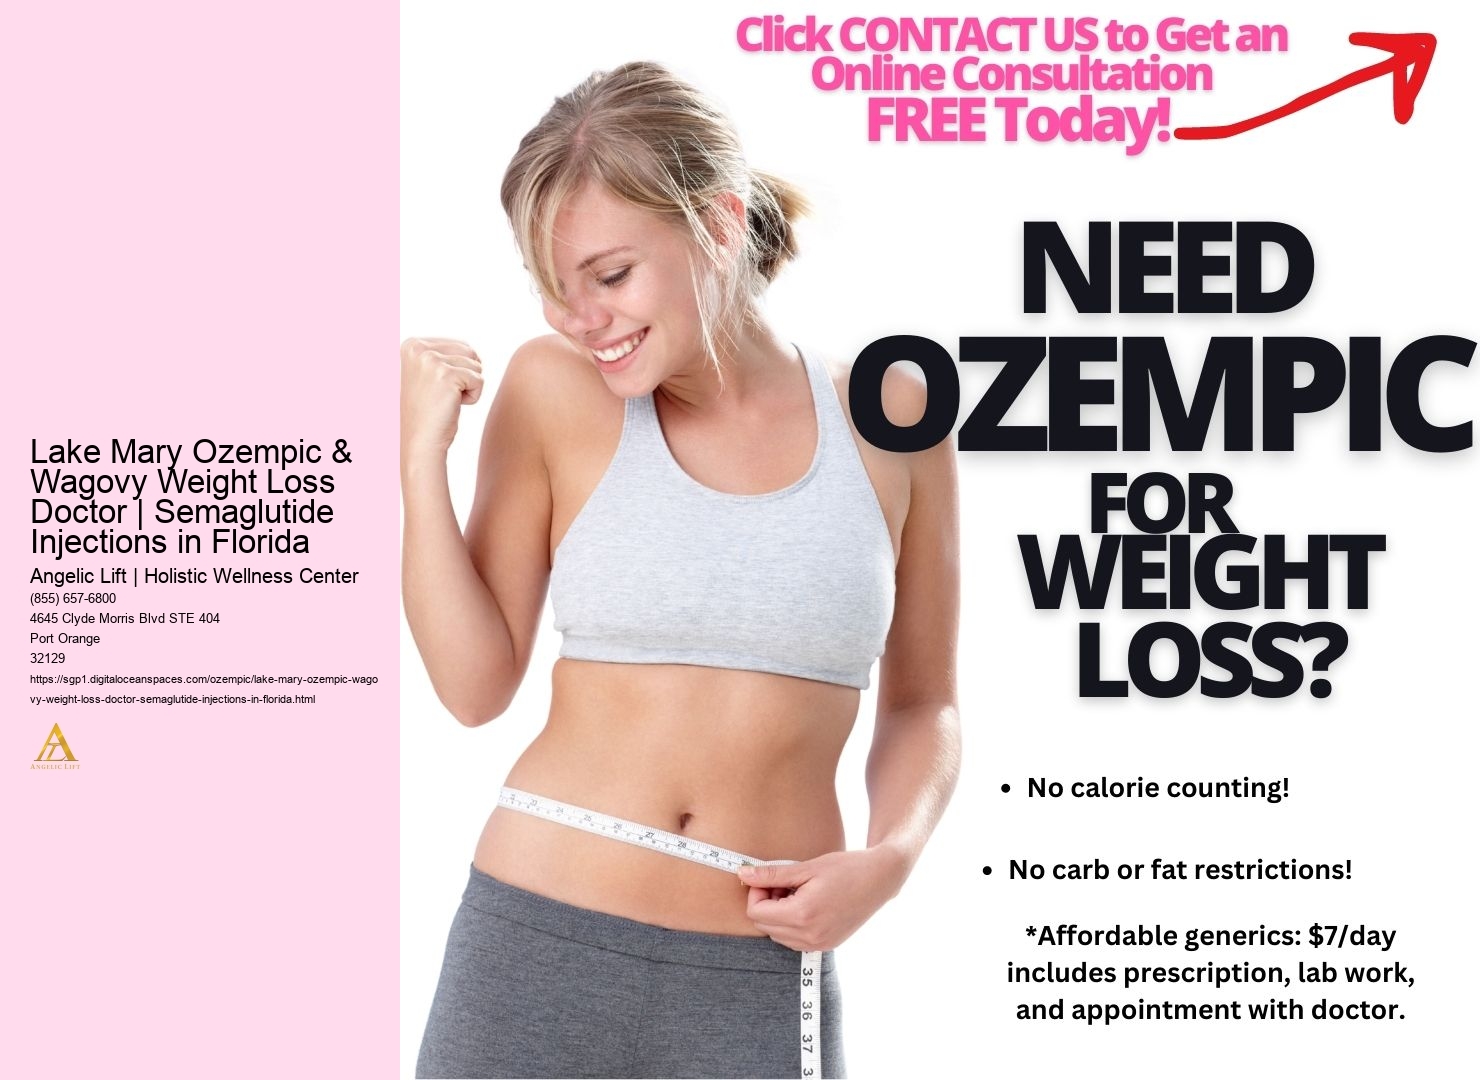 Lake Mary Ozempic & Wagovy Weight Loss Doctor | Semaglutide Injections in Florida